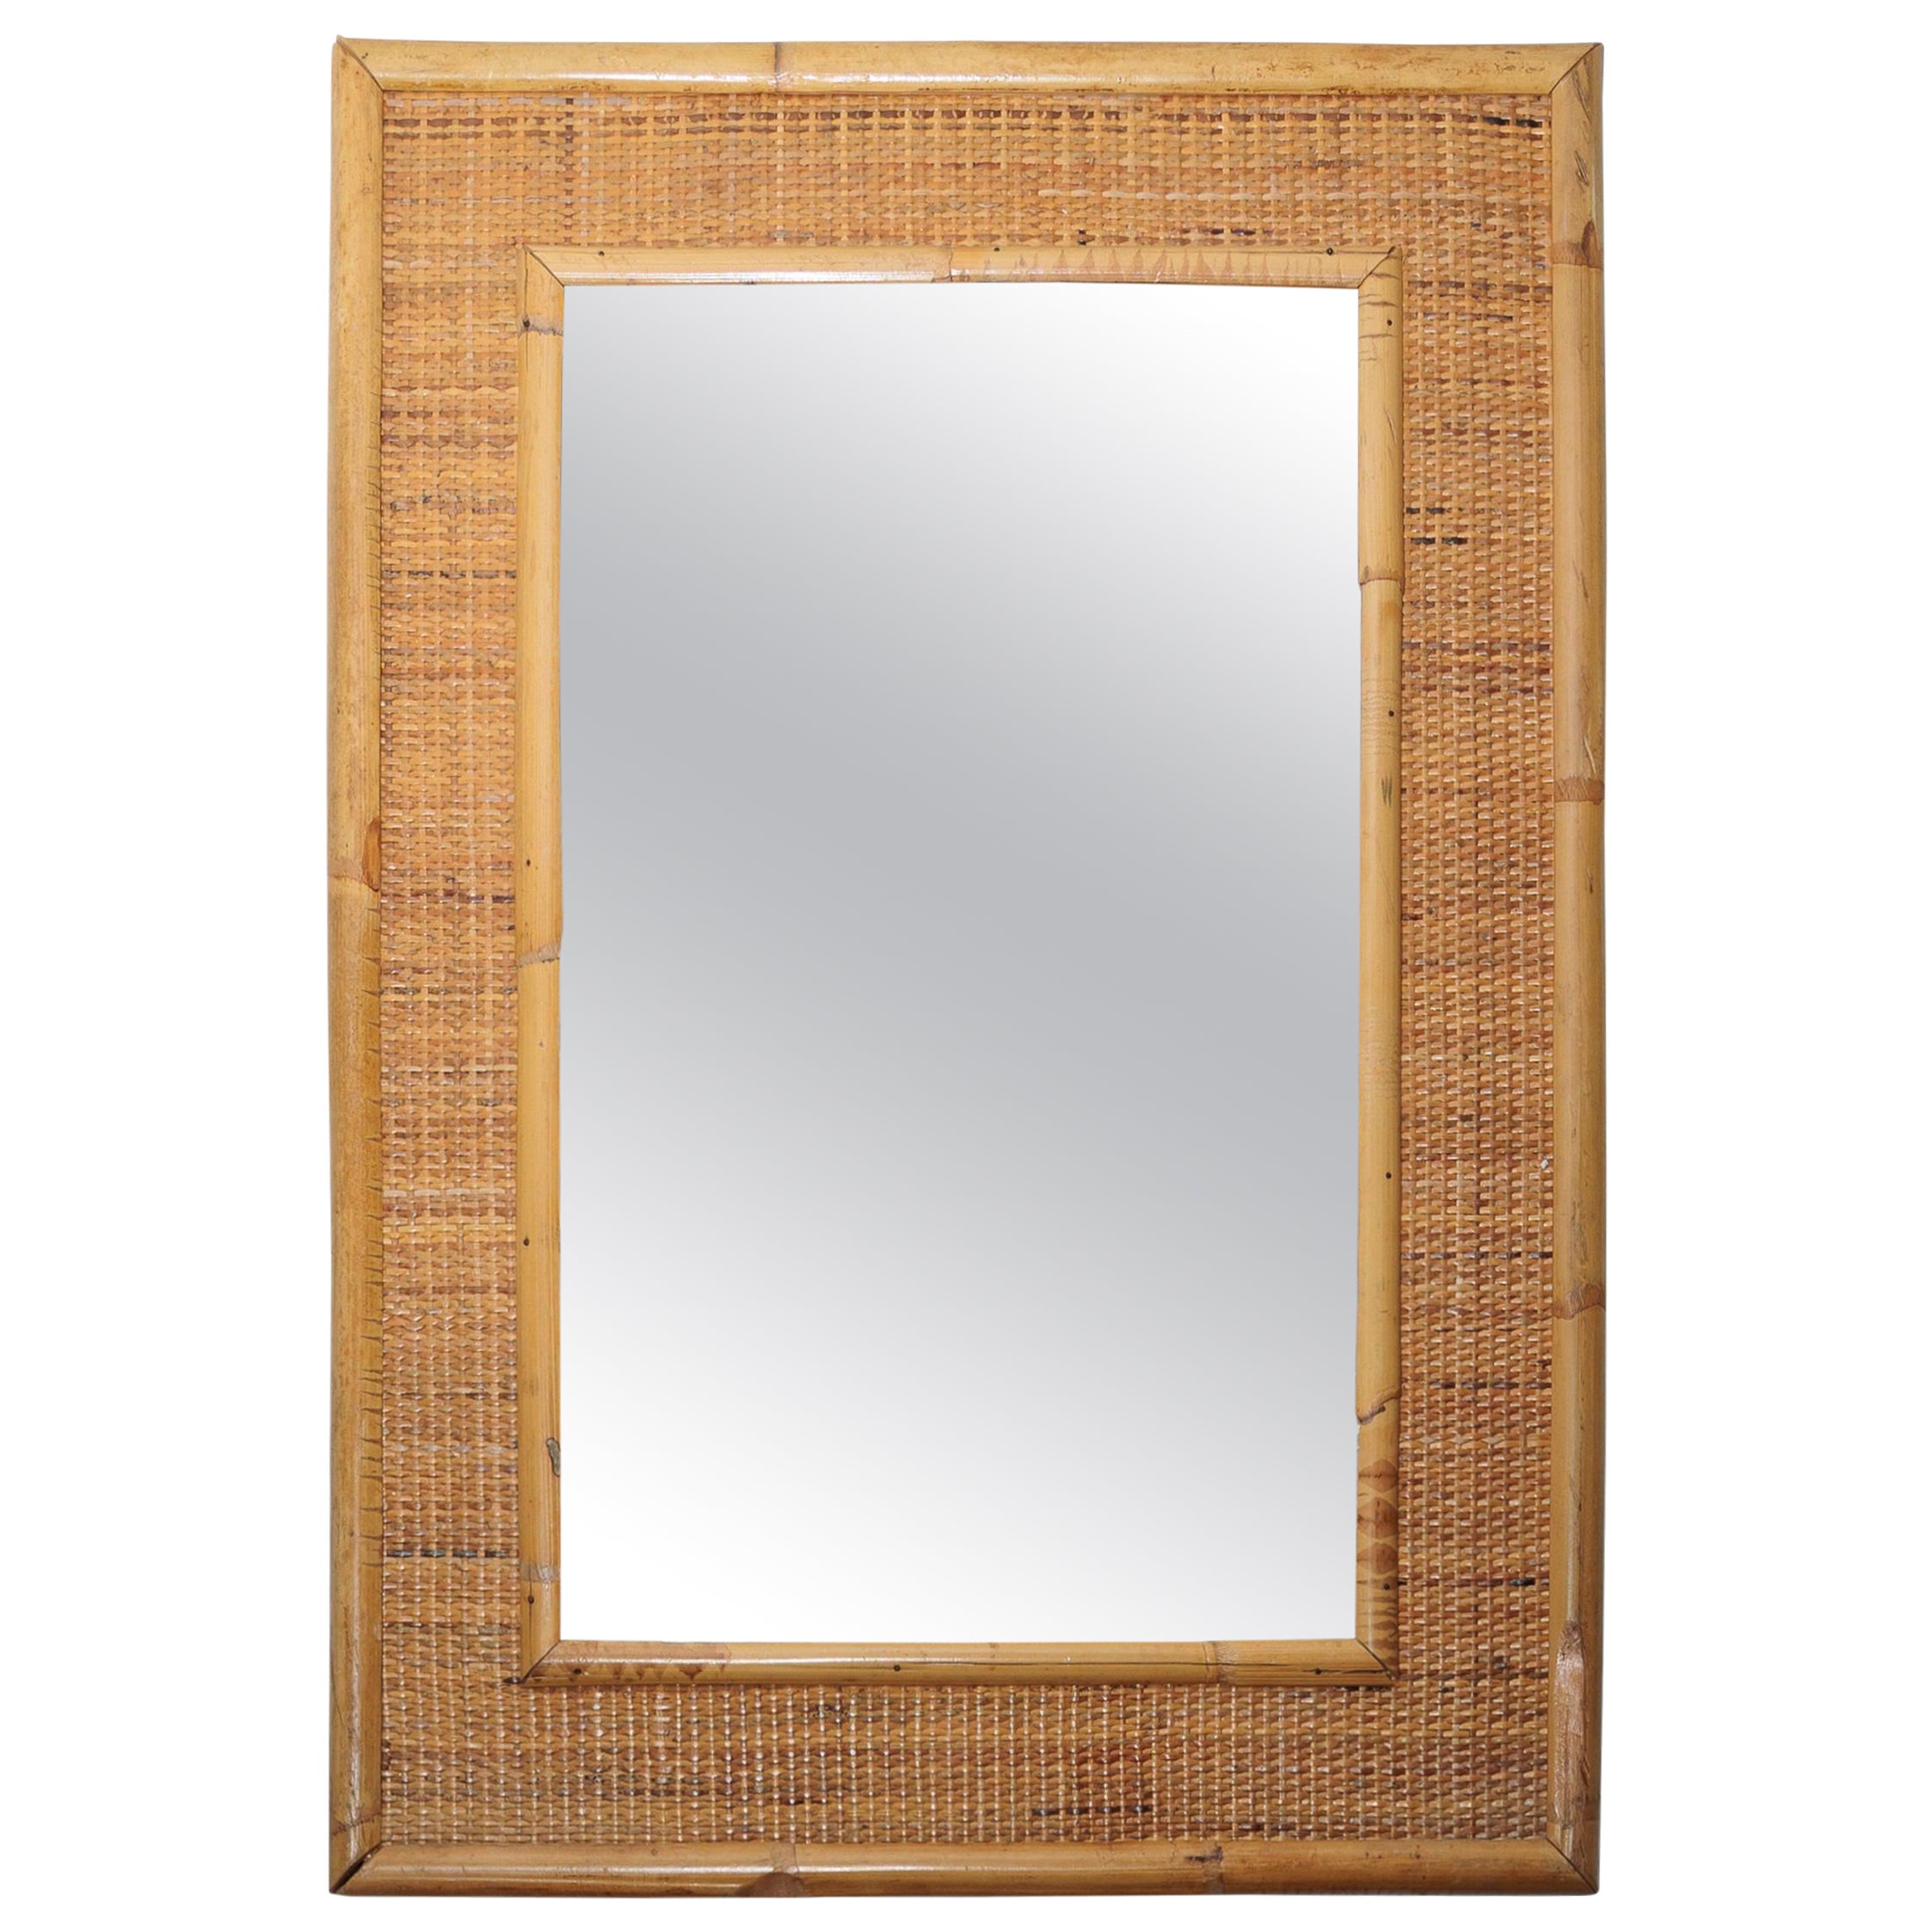 Bamboo and Woven Wicker Surround Mirror